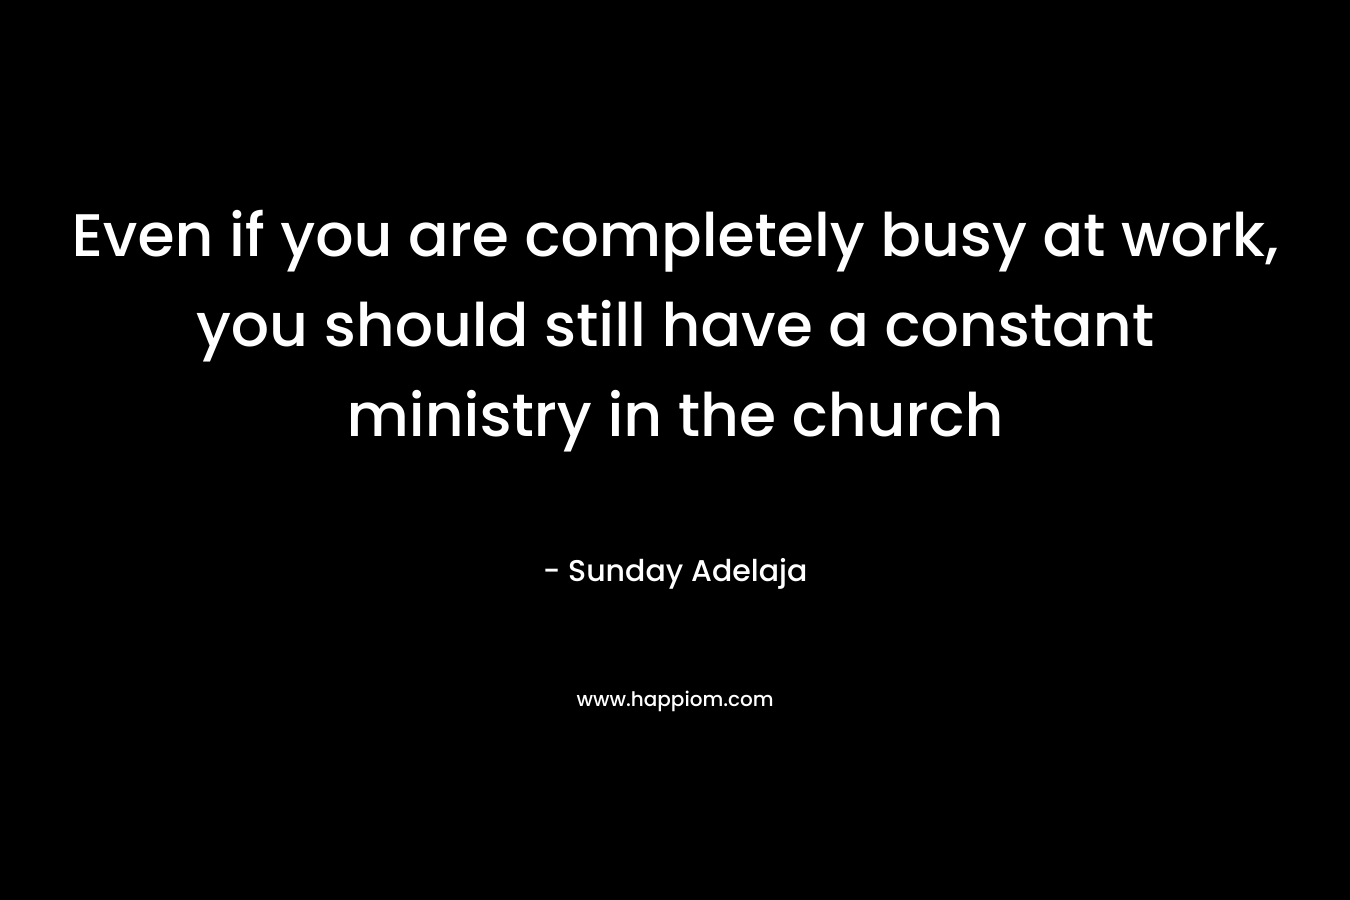 Even if you are completely busy at work, you should still have a constant ministry in the church